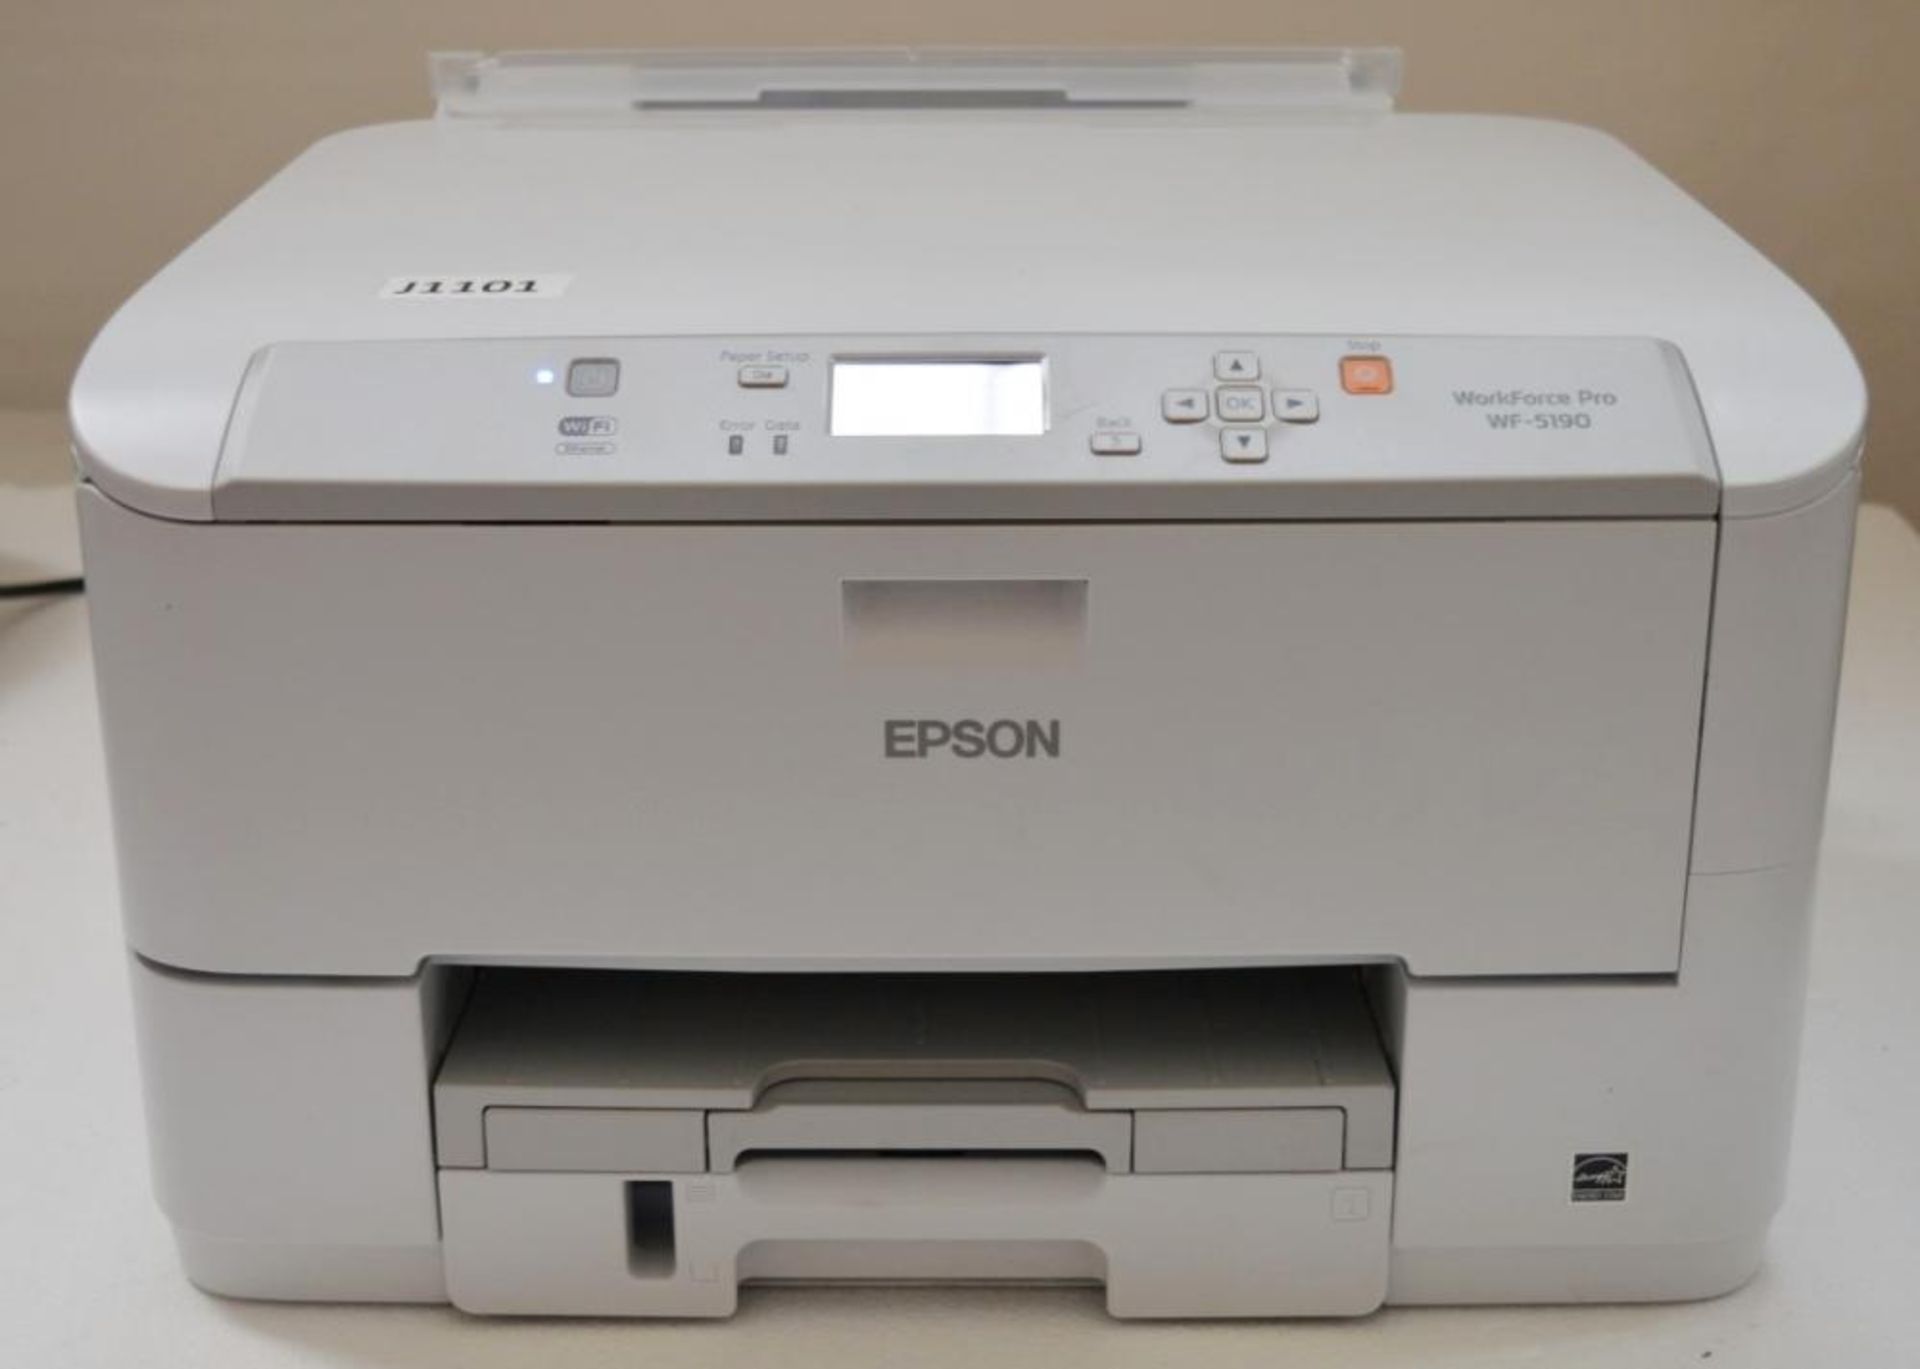 1 x Epson WorkForce Pro WF-5190 Colour Inkjet Printer - Features Include 4800x1200 dpi, 30ppm in